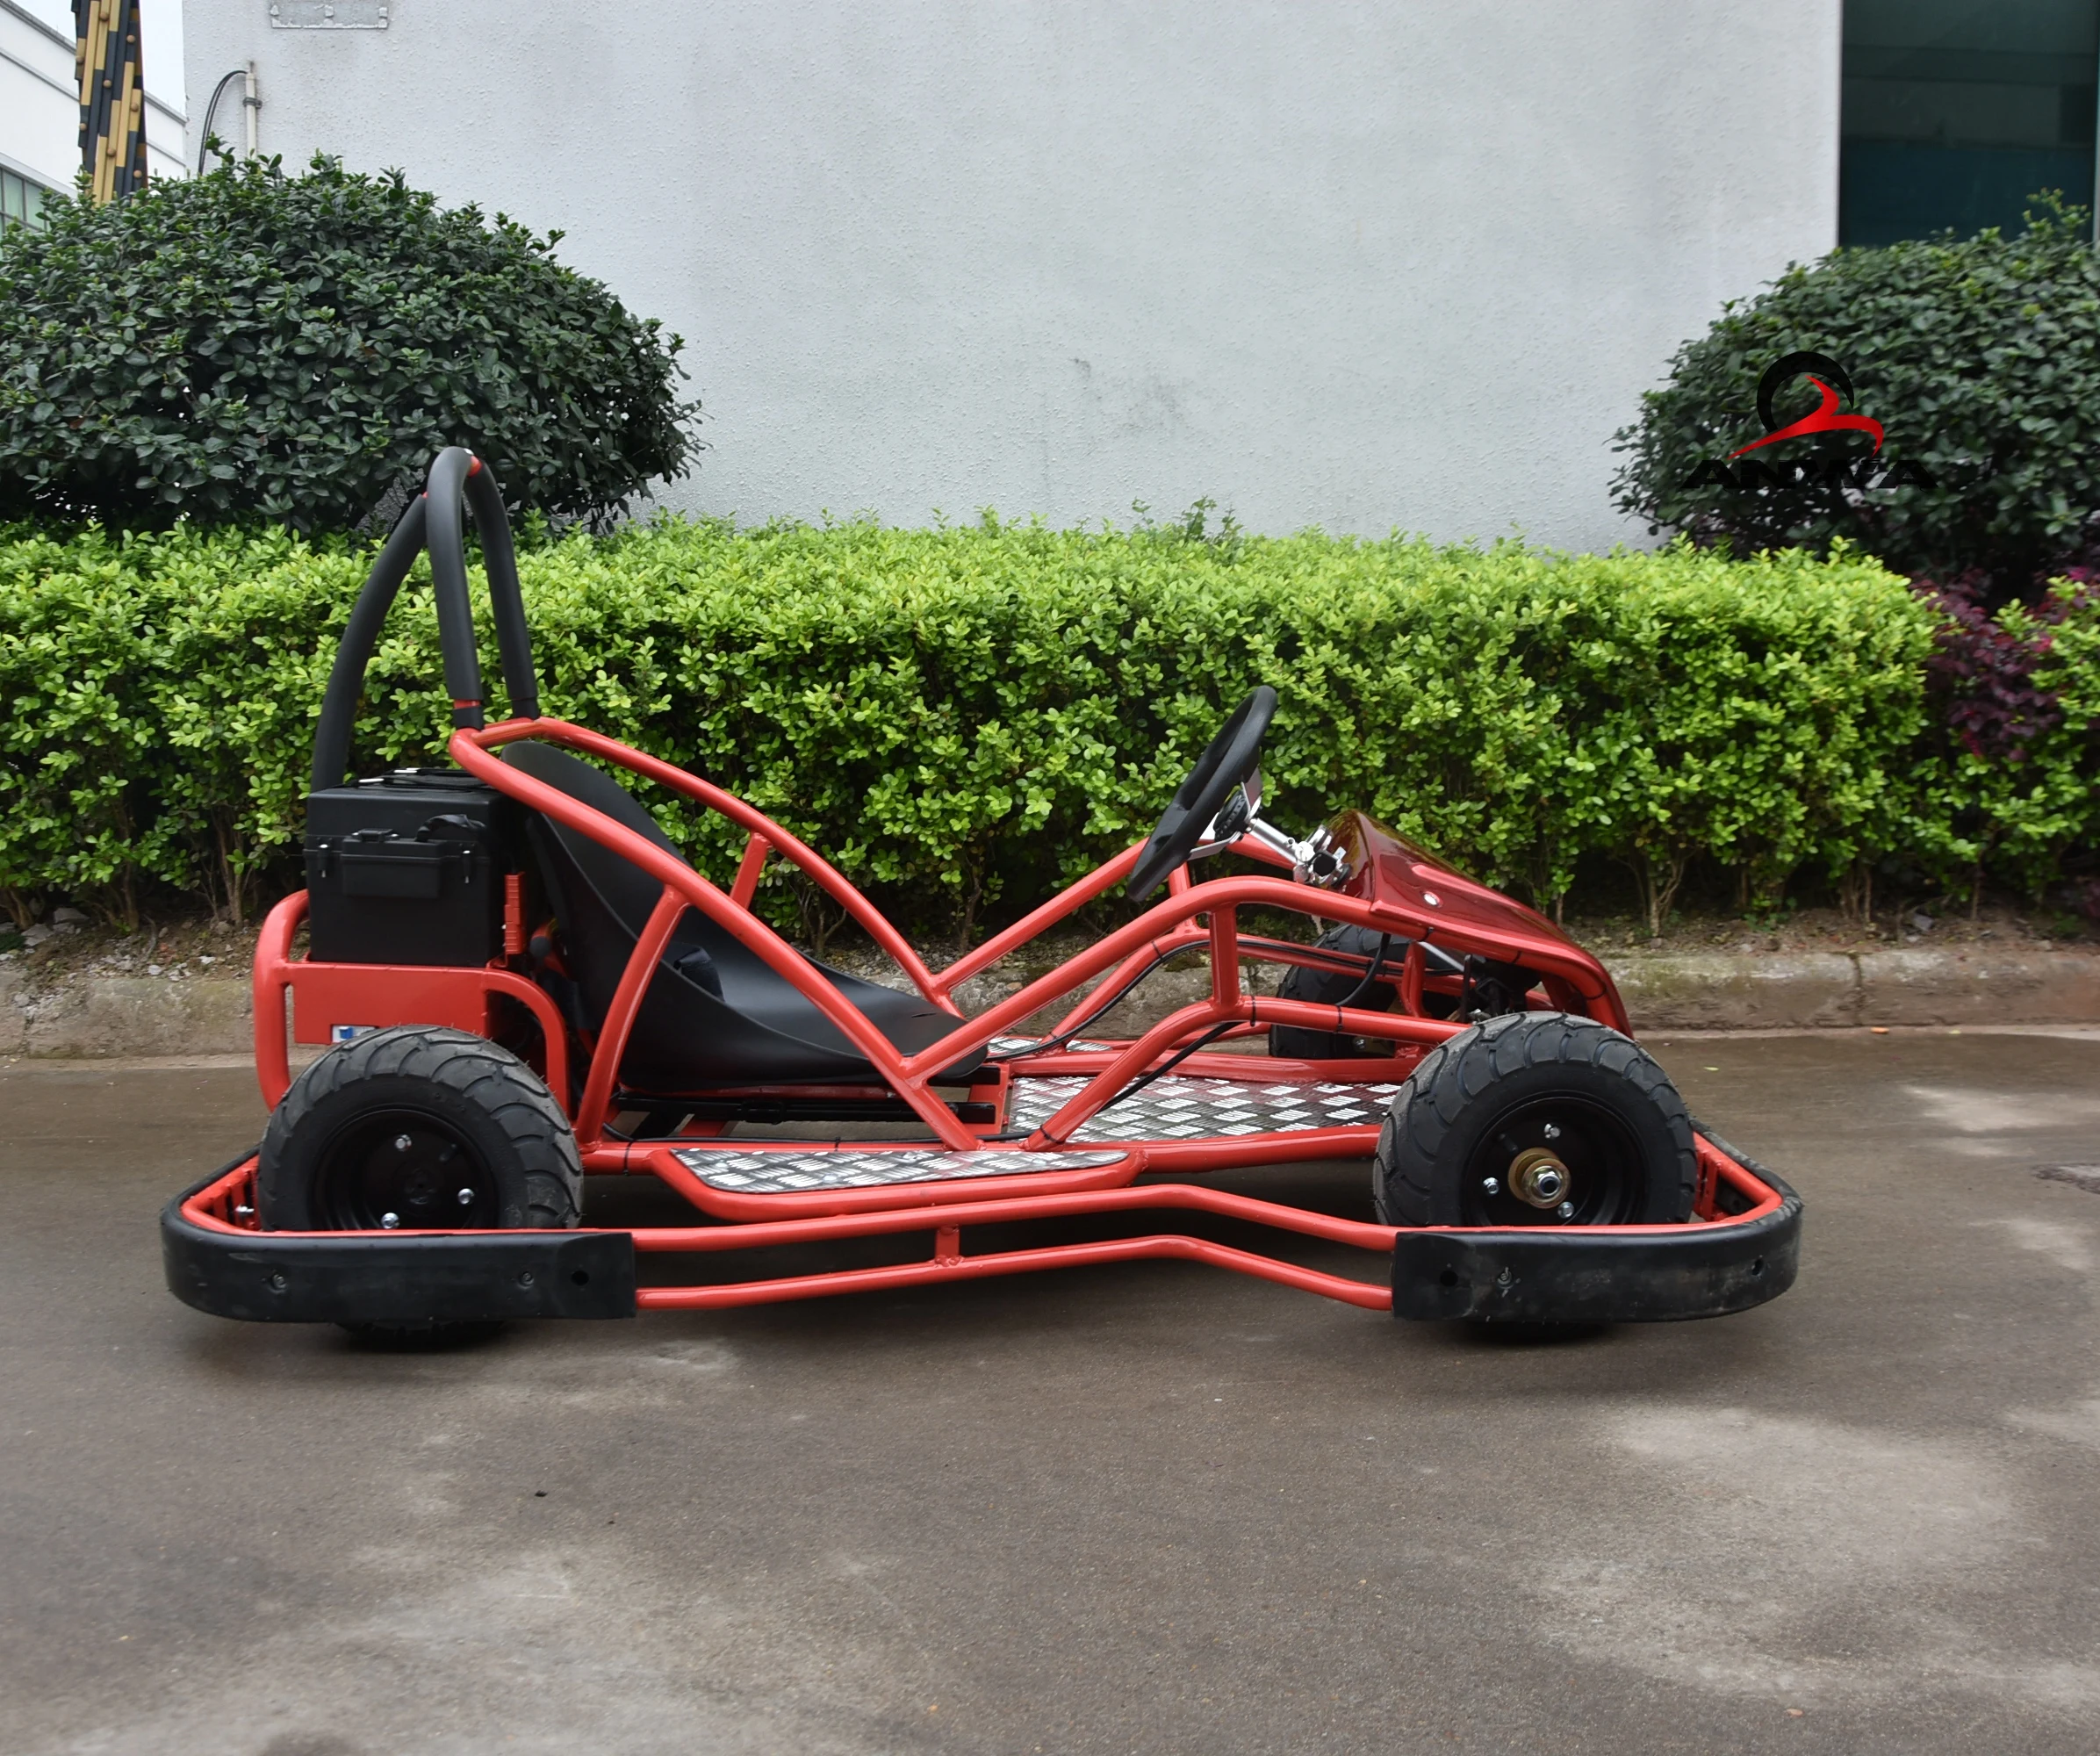 
Hot sale 1000W Electric Go Karts for adults/Kids 